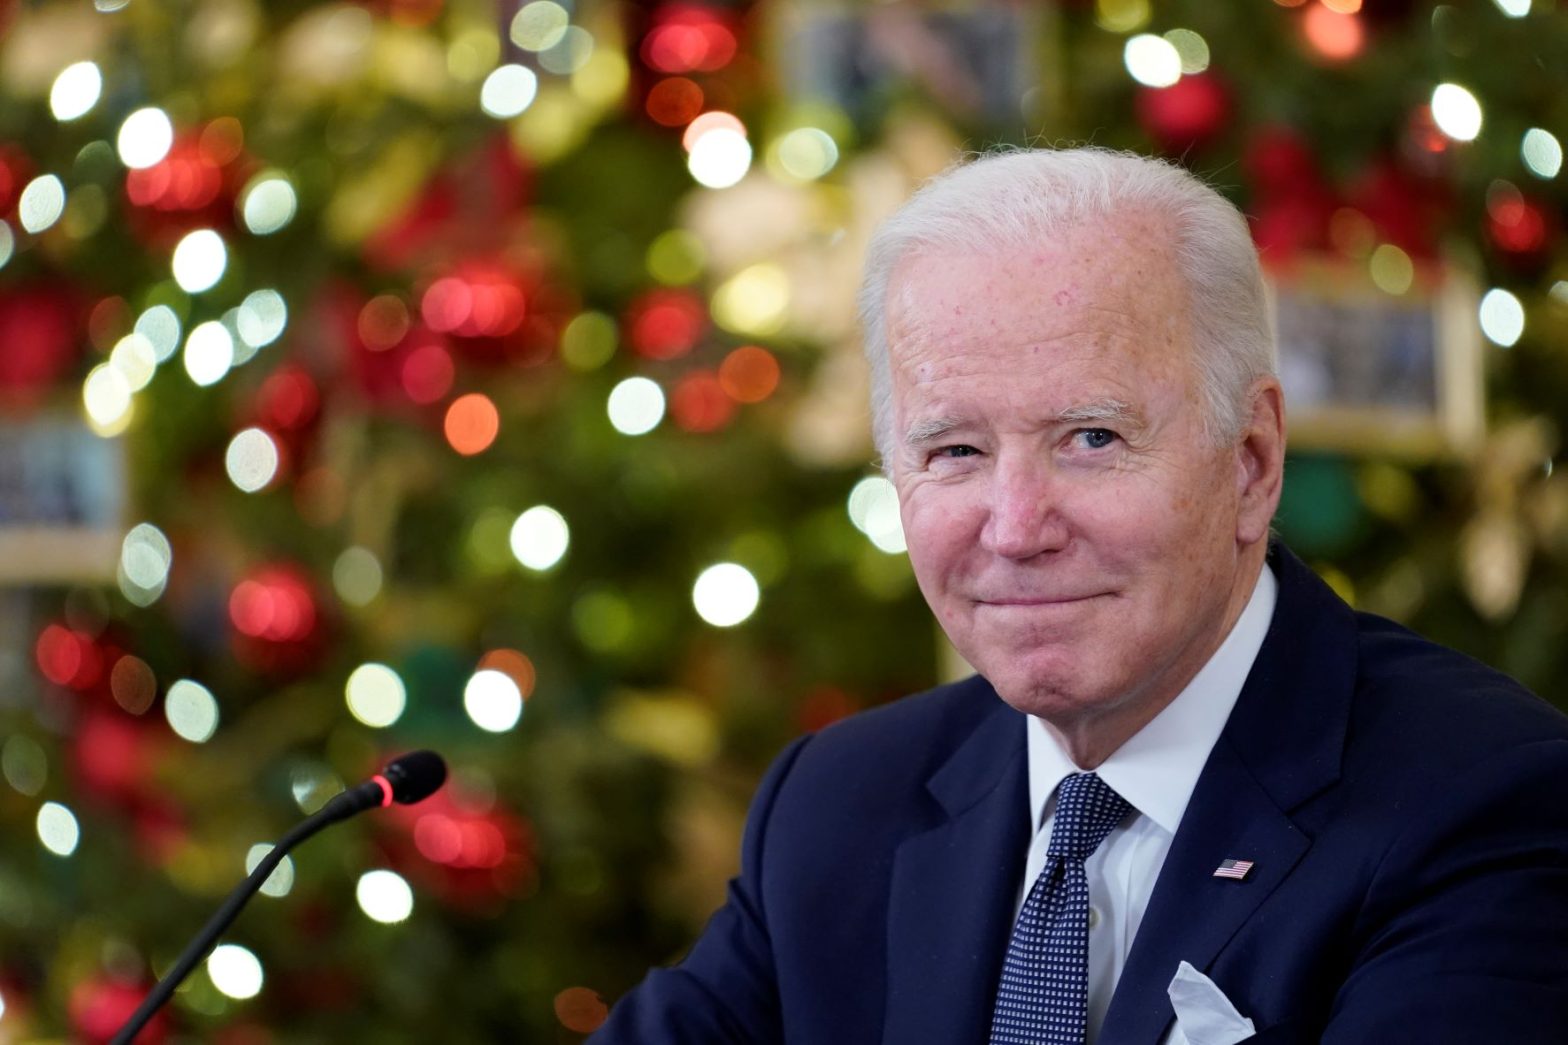 Biden Seeks to Cut the Red Tape When it Comes to Government Services